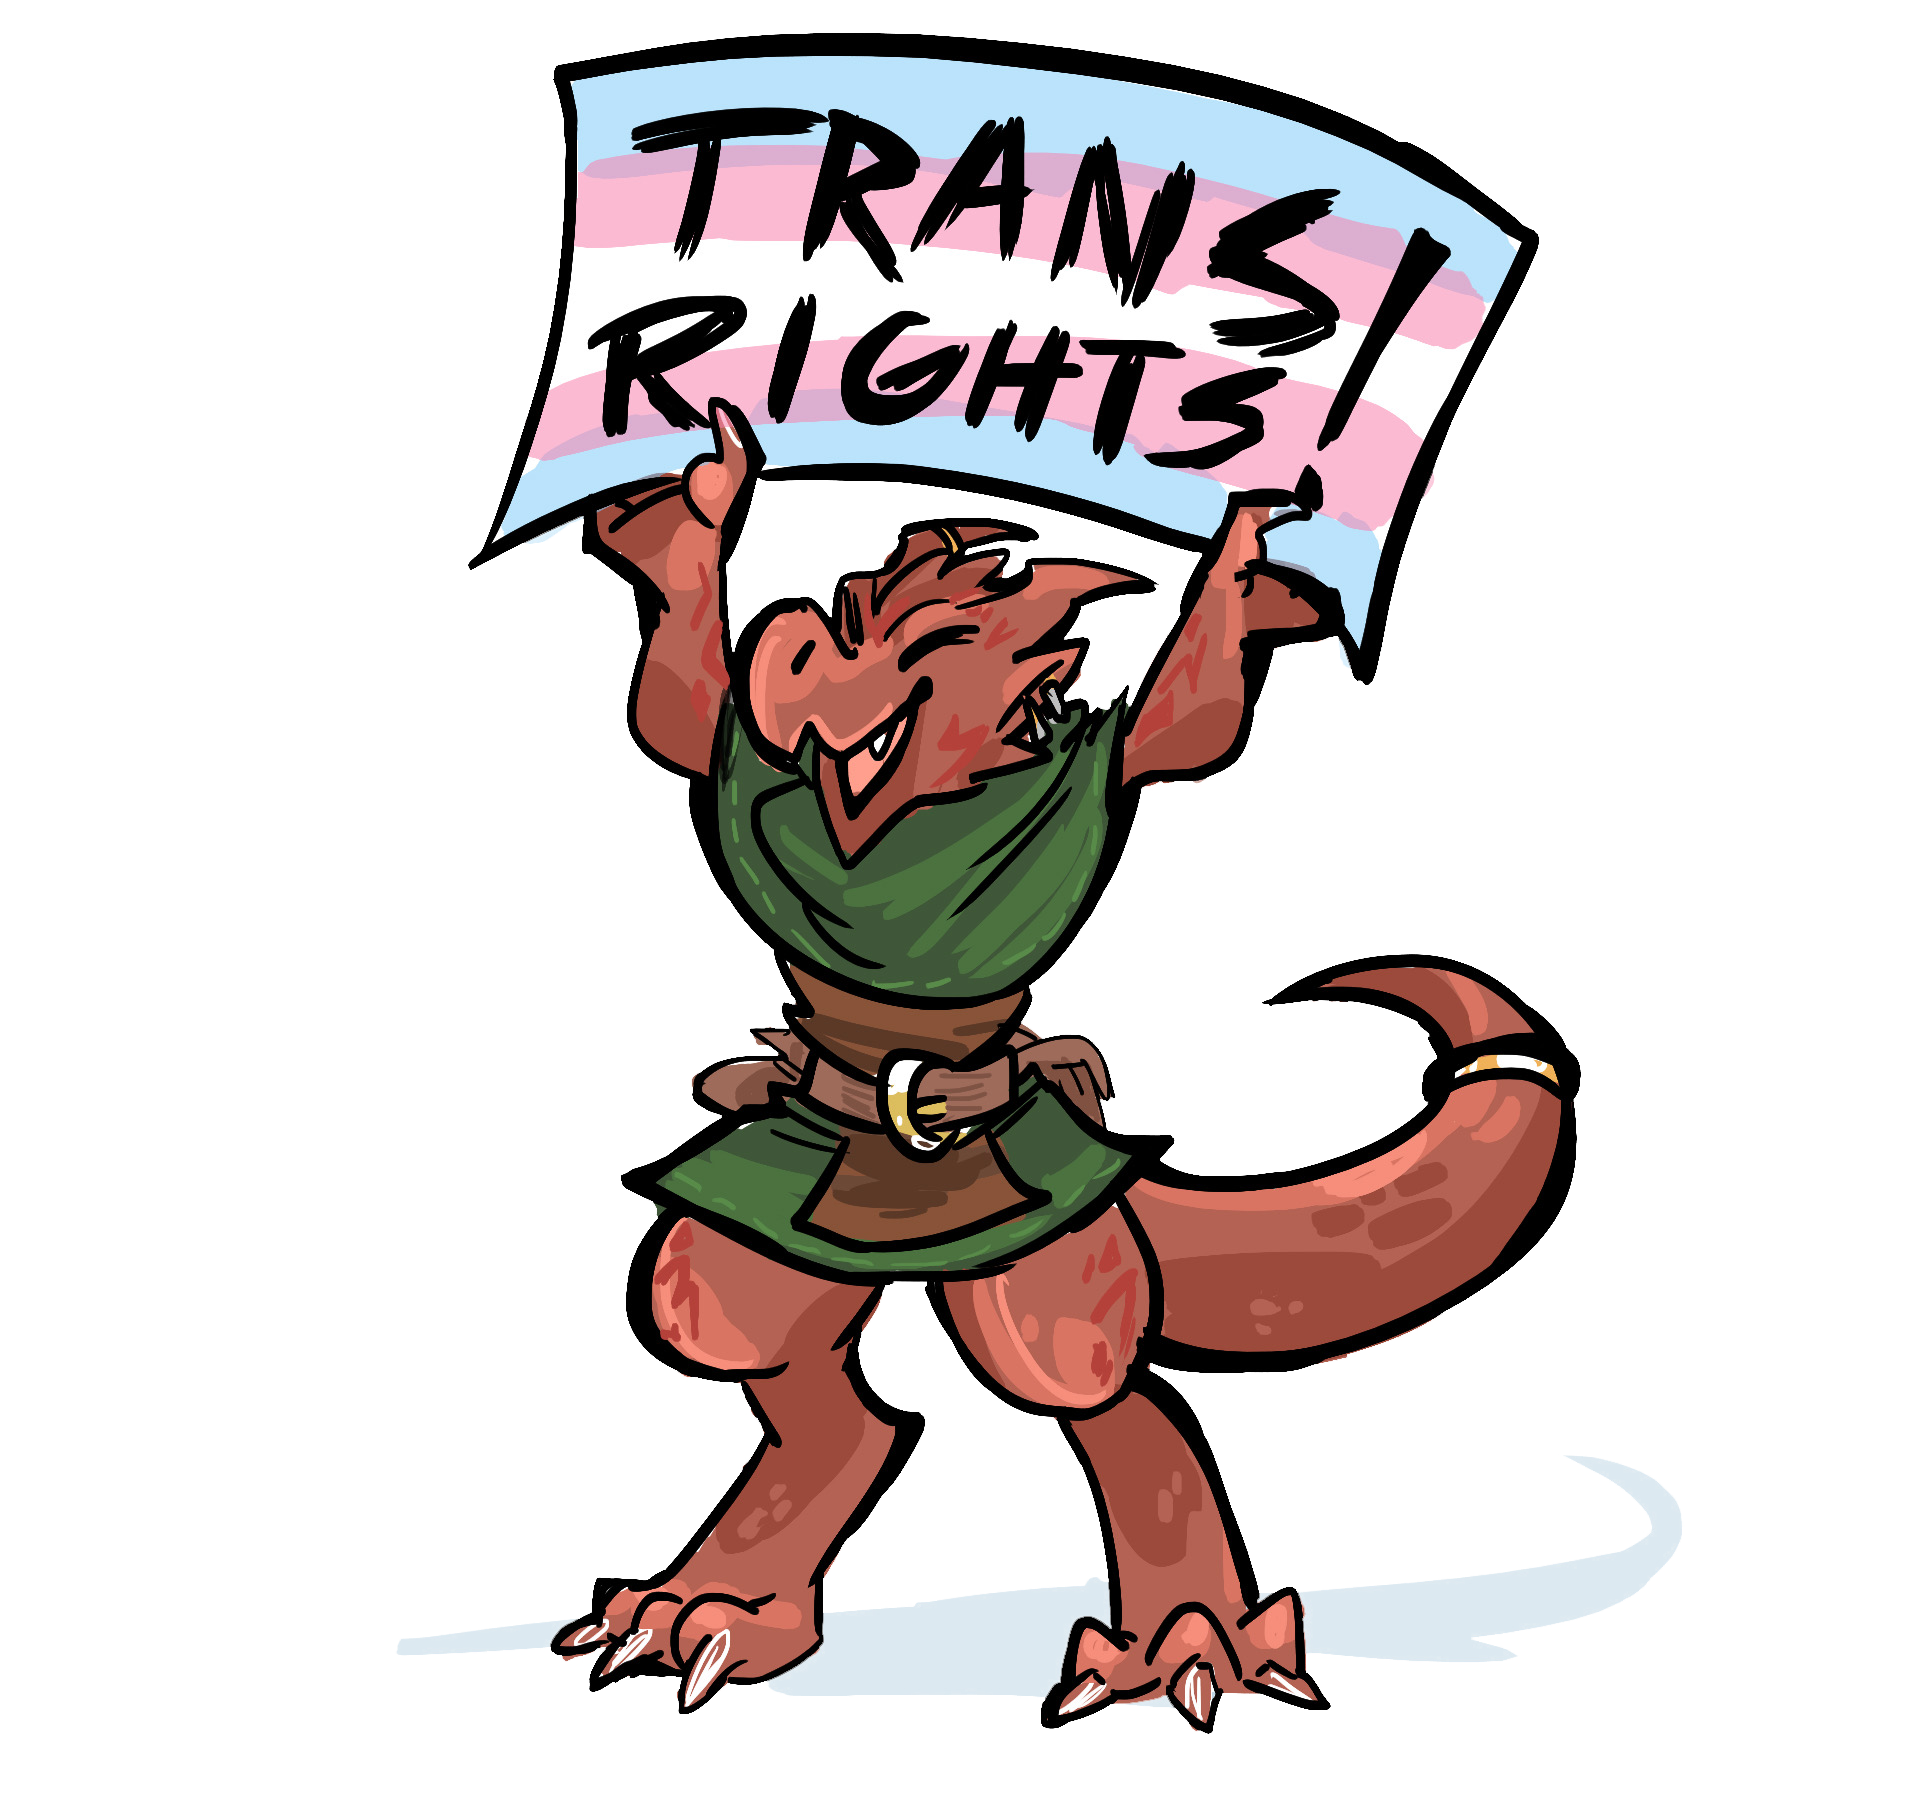 wyx says TRANS RIGHTS!